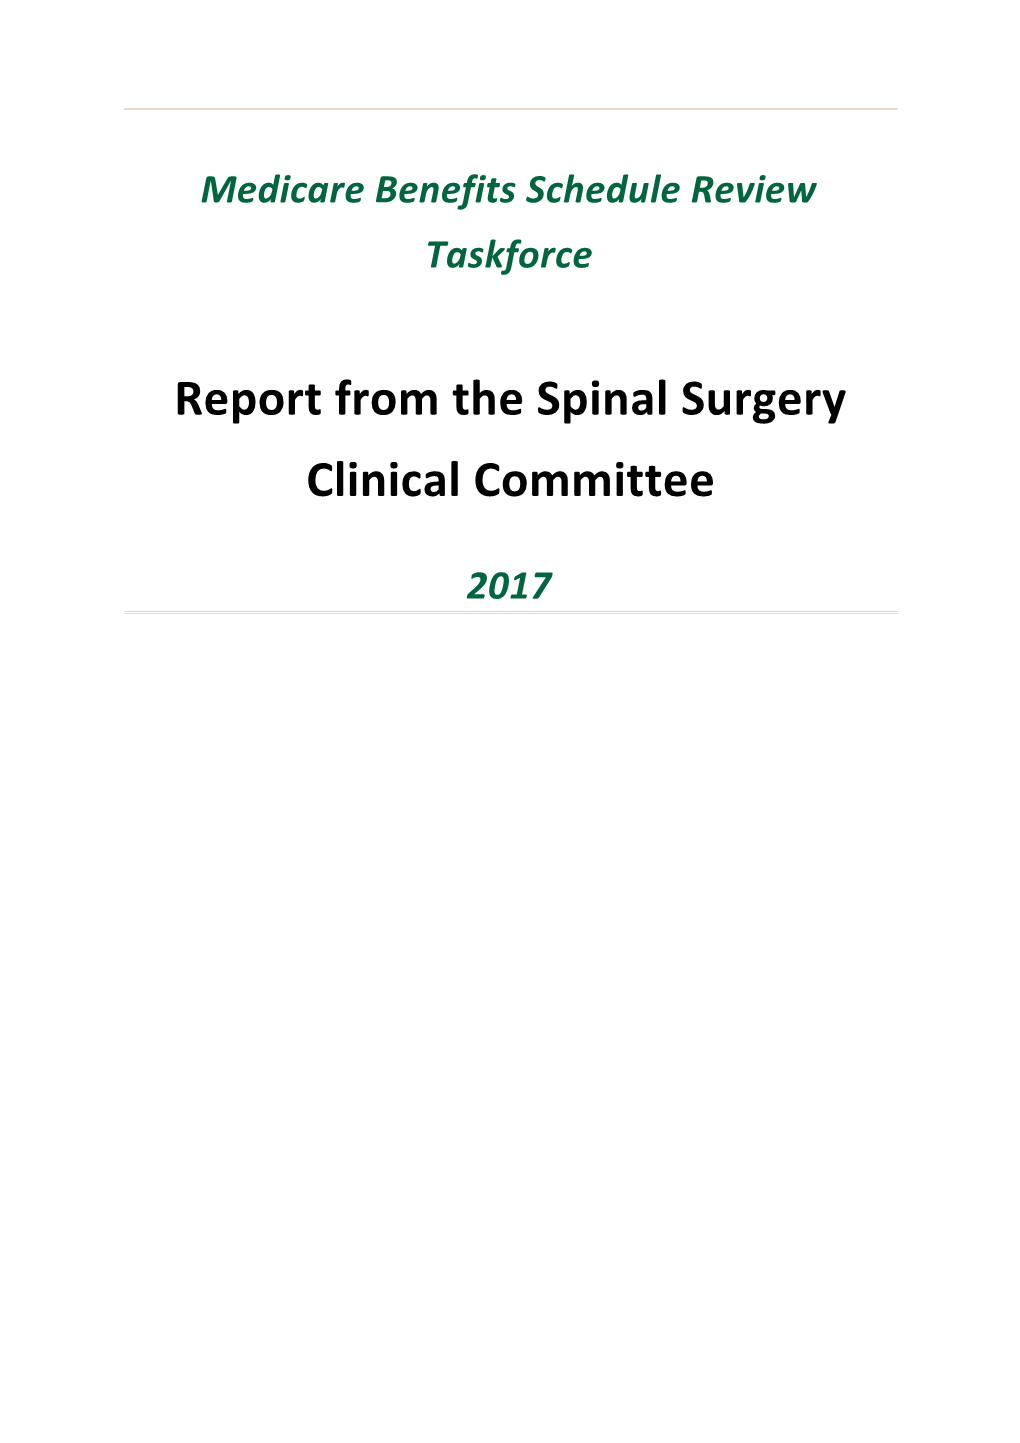 Report from the Spinal Surgery Clinical Committee